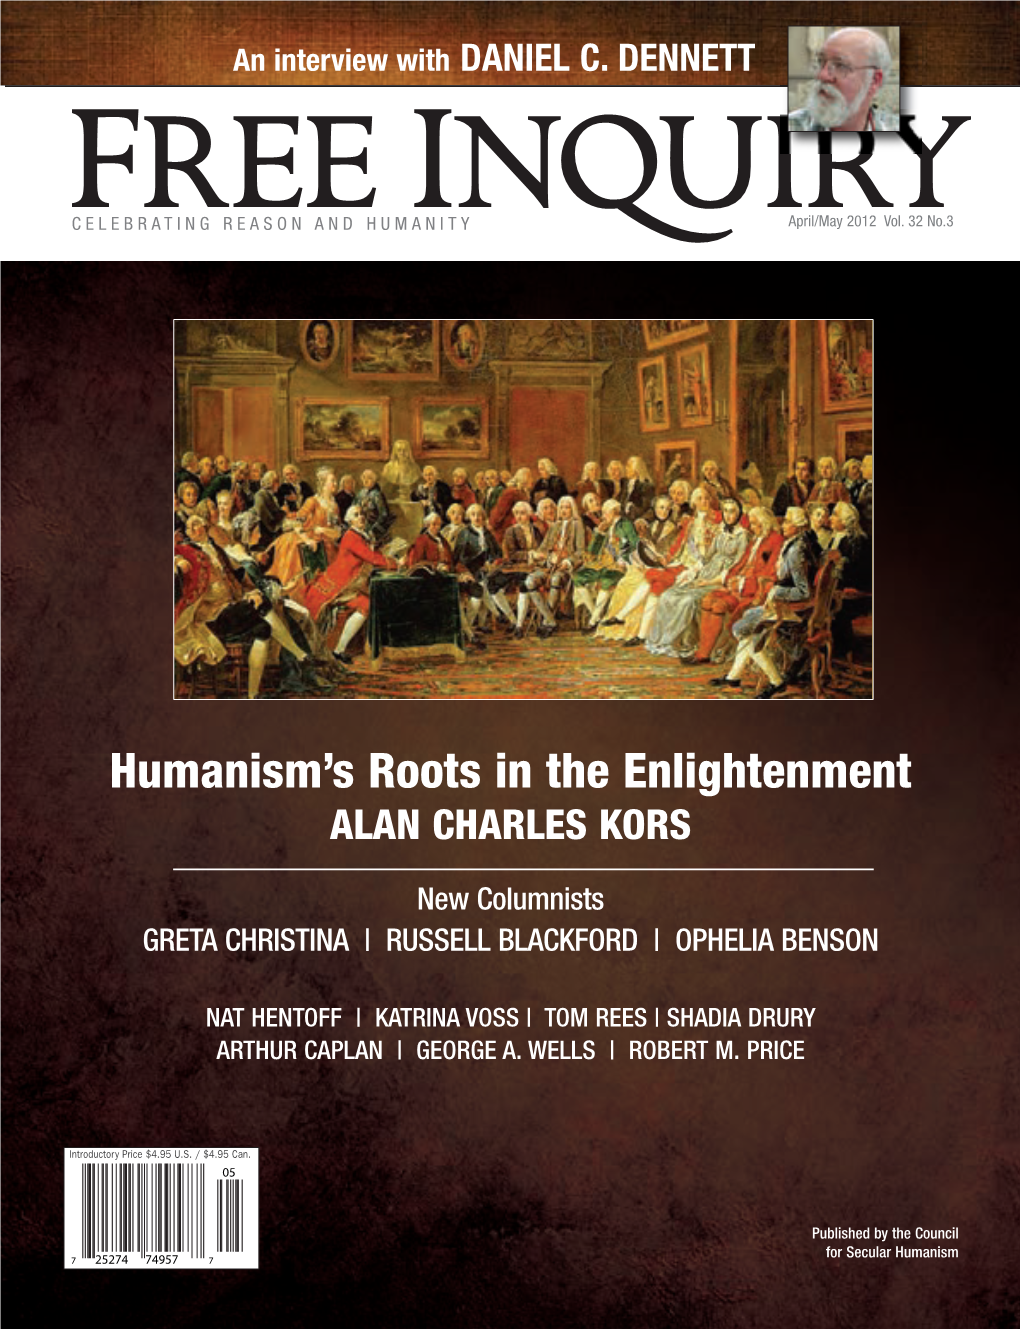 Humanism's Roots in the Enlightenment